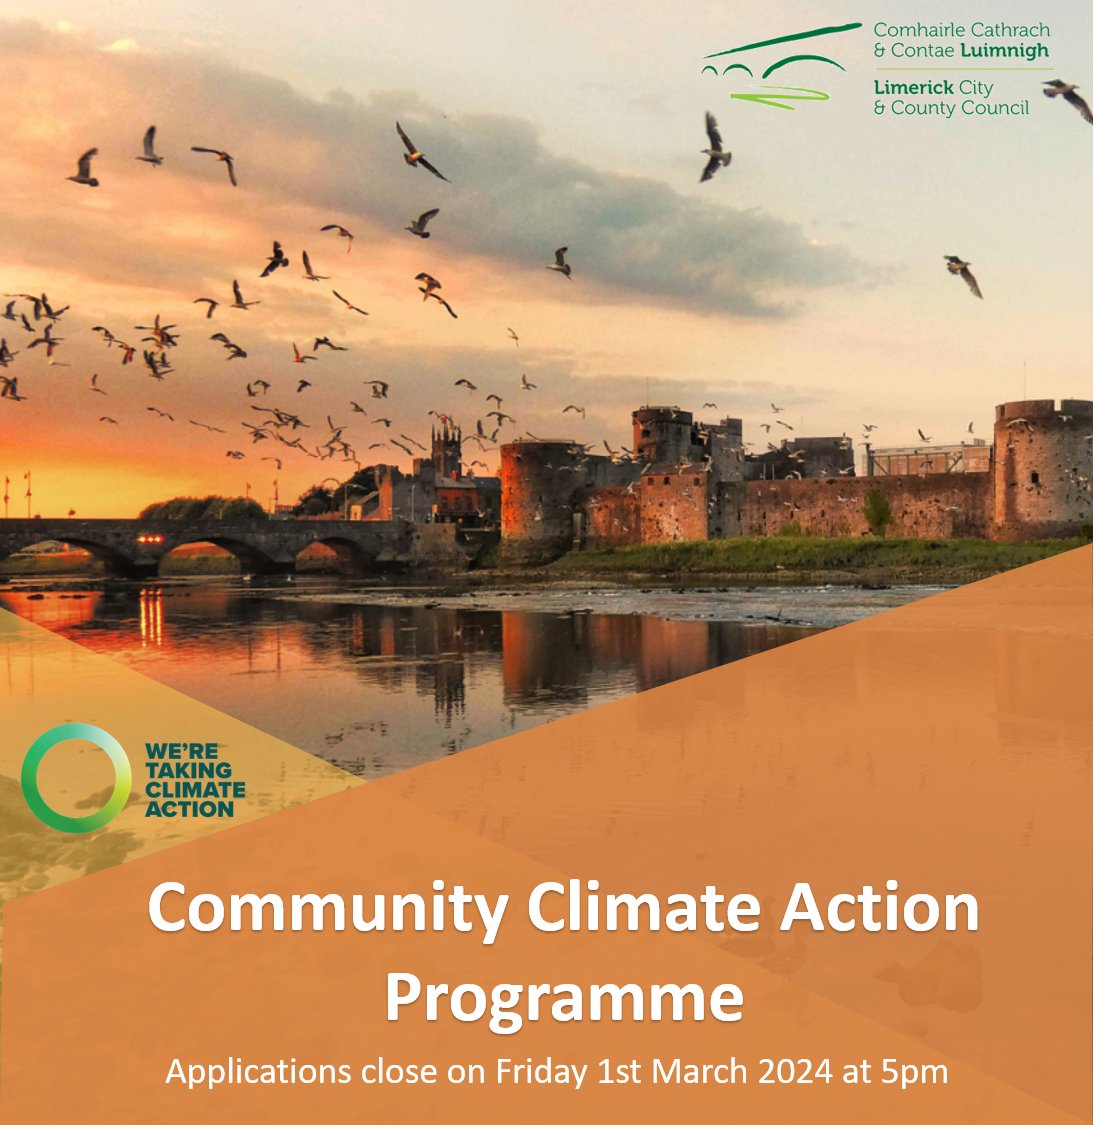 Just a little over 3 weeks remain to apply for Limerick City and County Council #CommunityClimateActionProgramme (CCAP). More Information, Briefing Documents and applications can be found at mypoint.limerick.ie/en/applications To speak with me please email communityclimatefund@limerick.ie